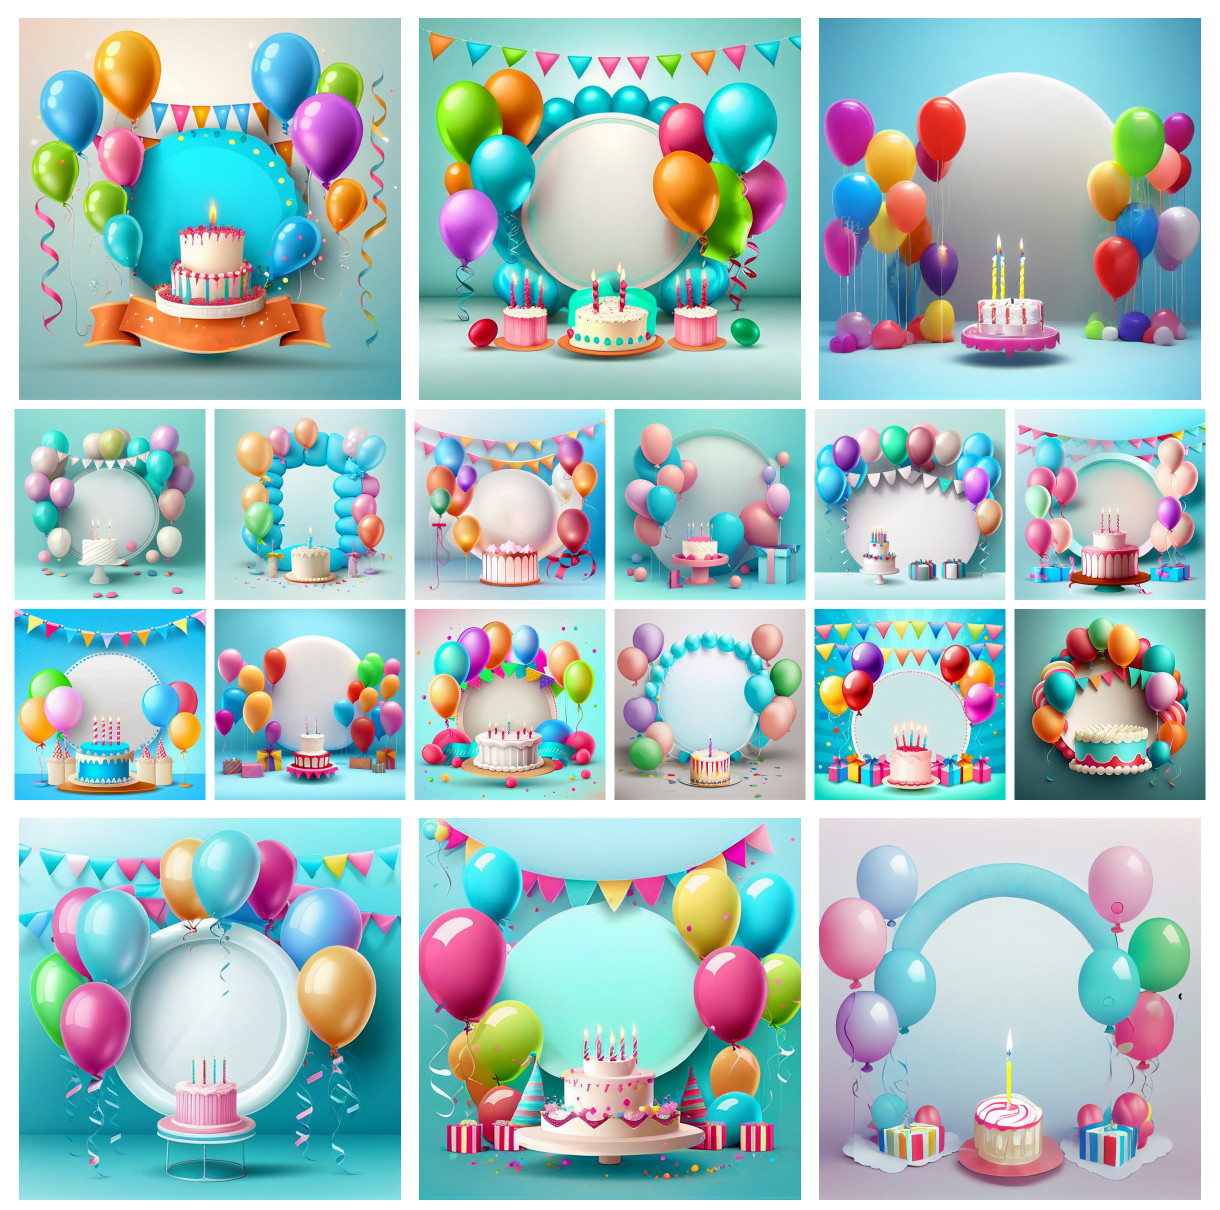 High Definition Elegance: Birthday Backgrounds to Elevate Your Celebrations